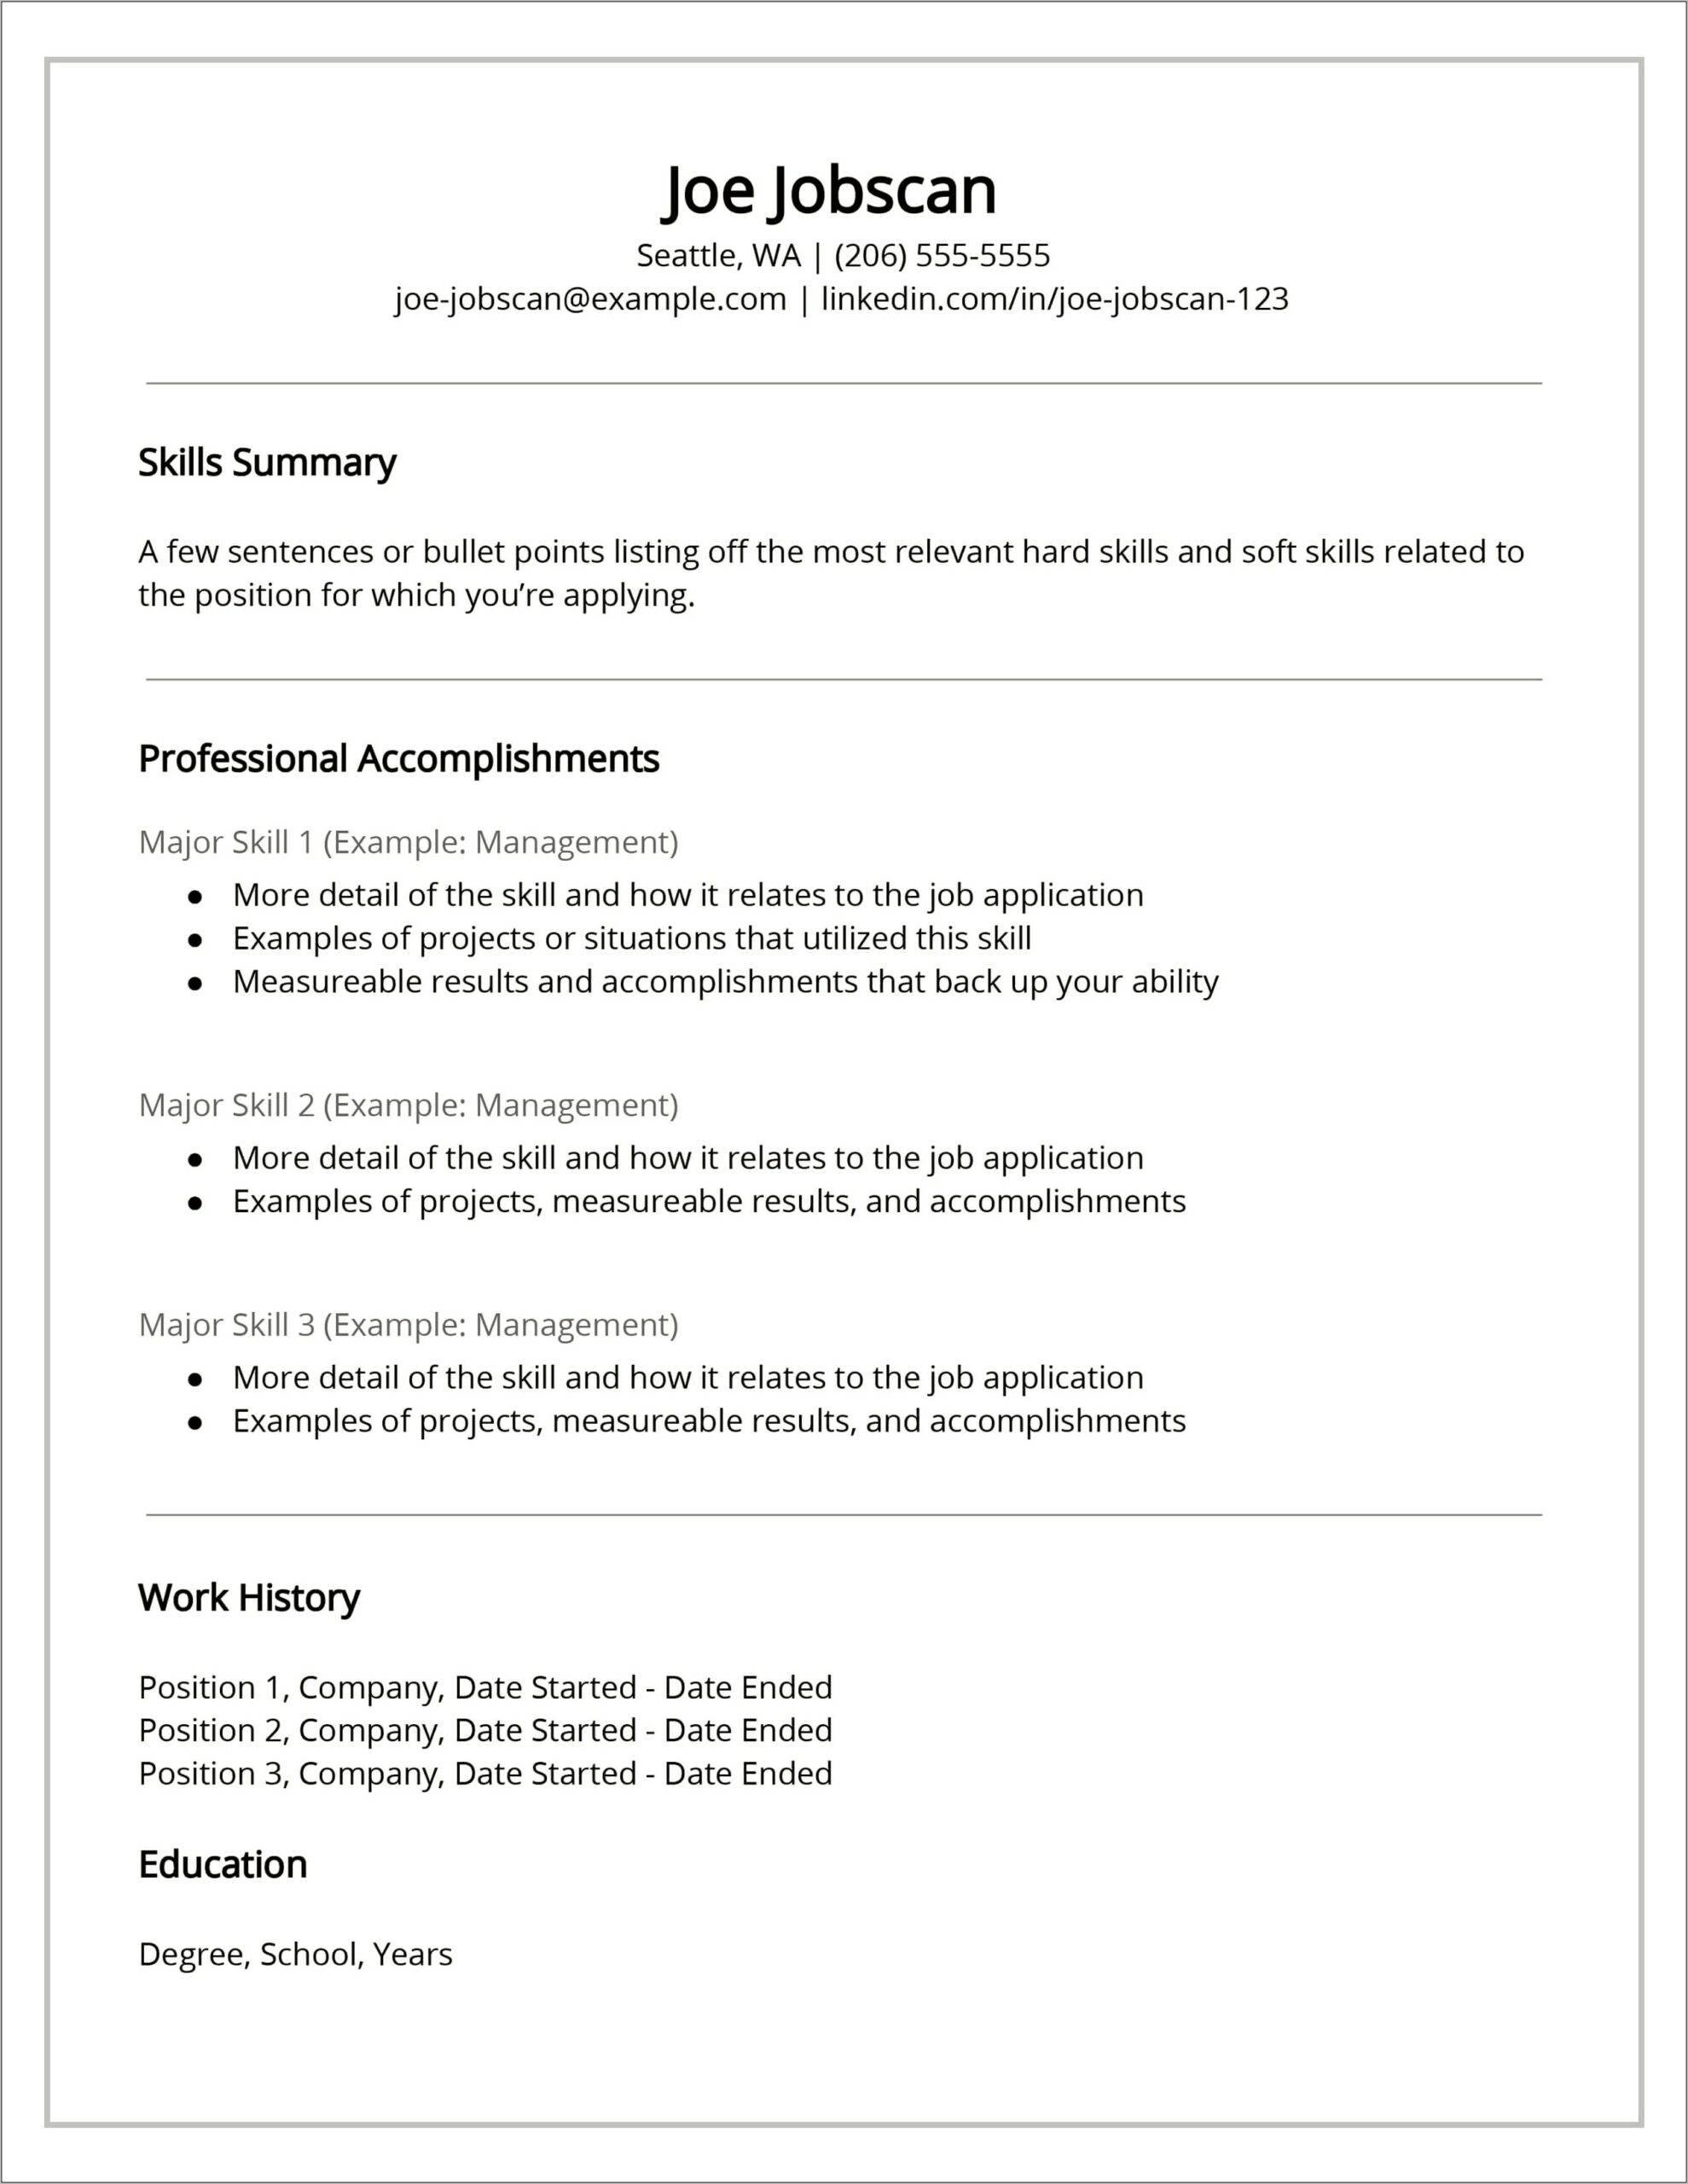 A Good Resume Example For Jobs